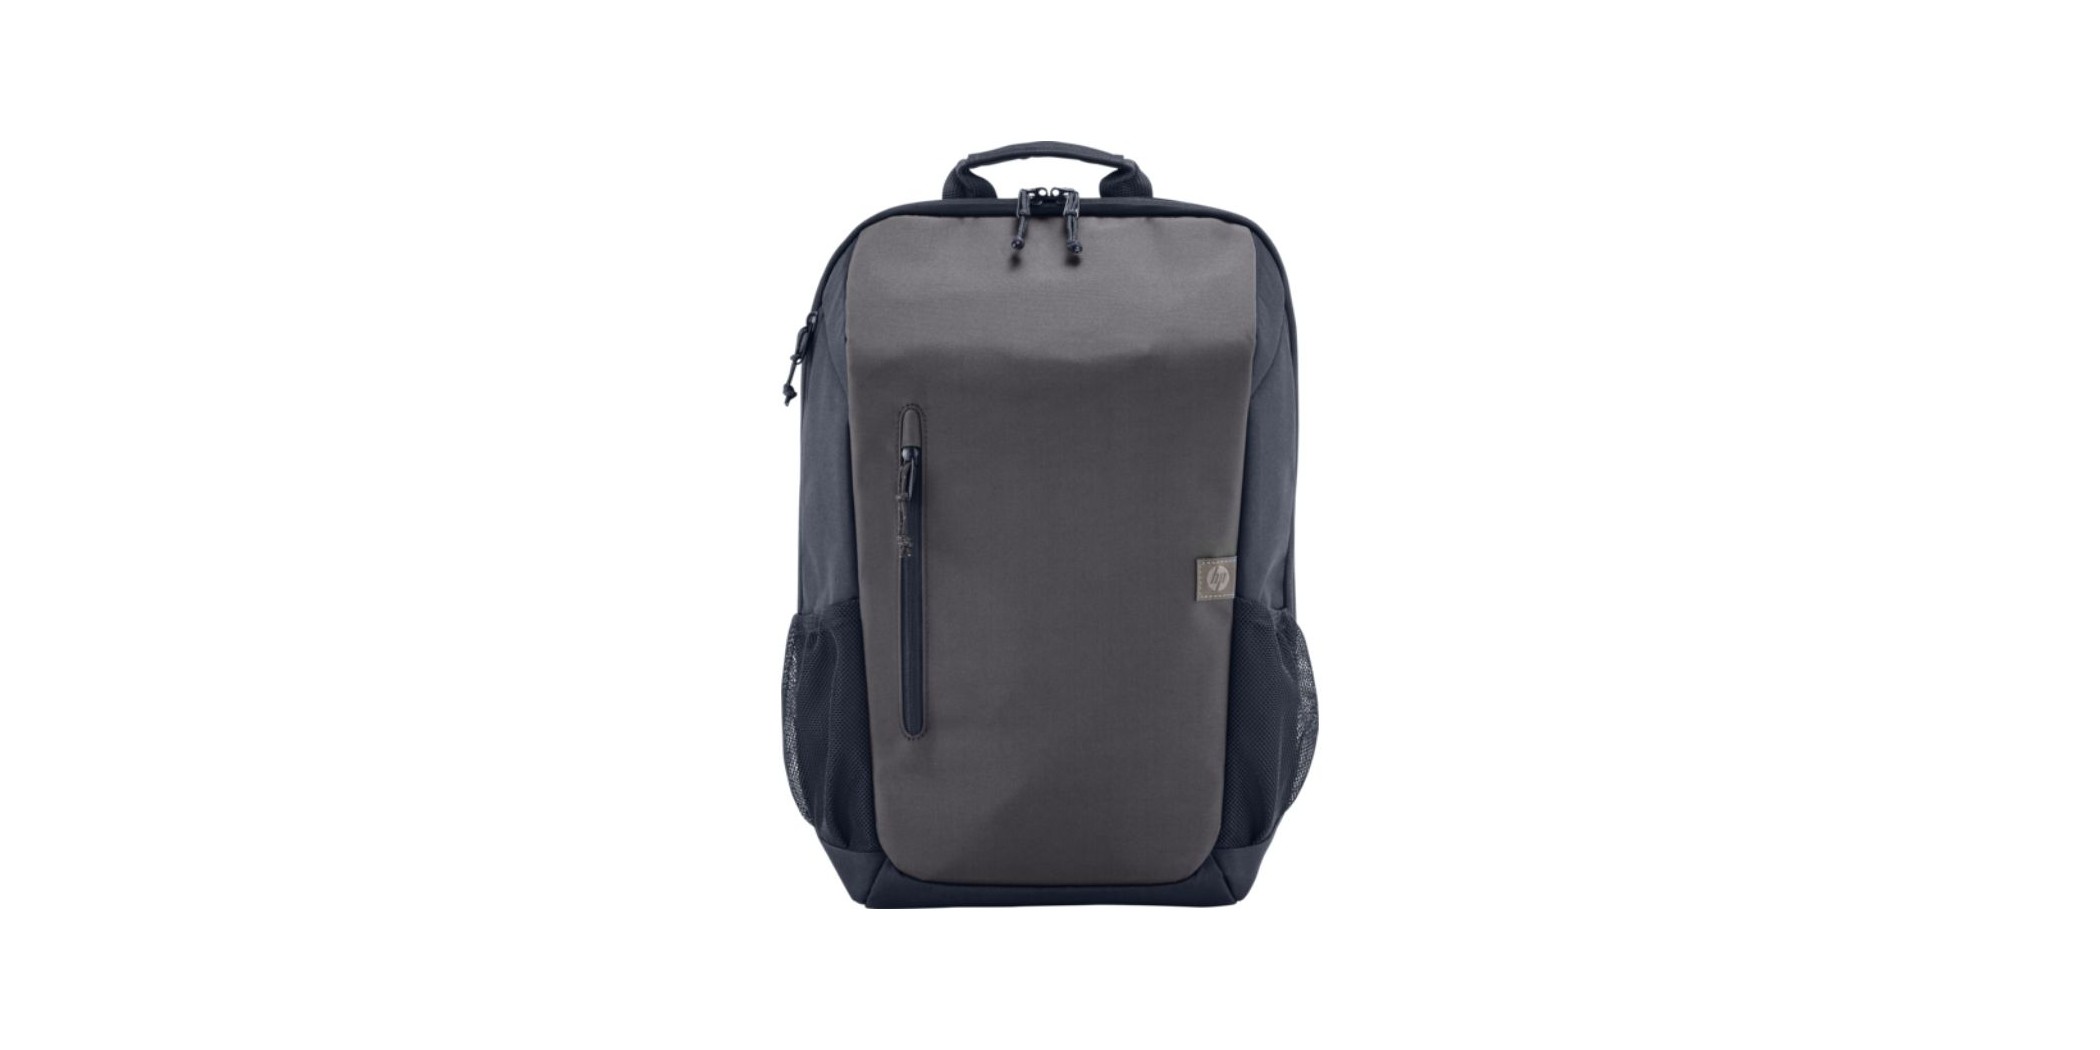 HP Travel 18L 15.6 Laptop Backpack - Iron Grey